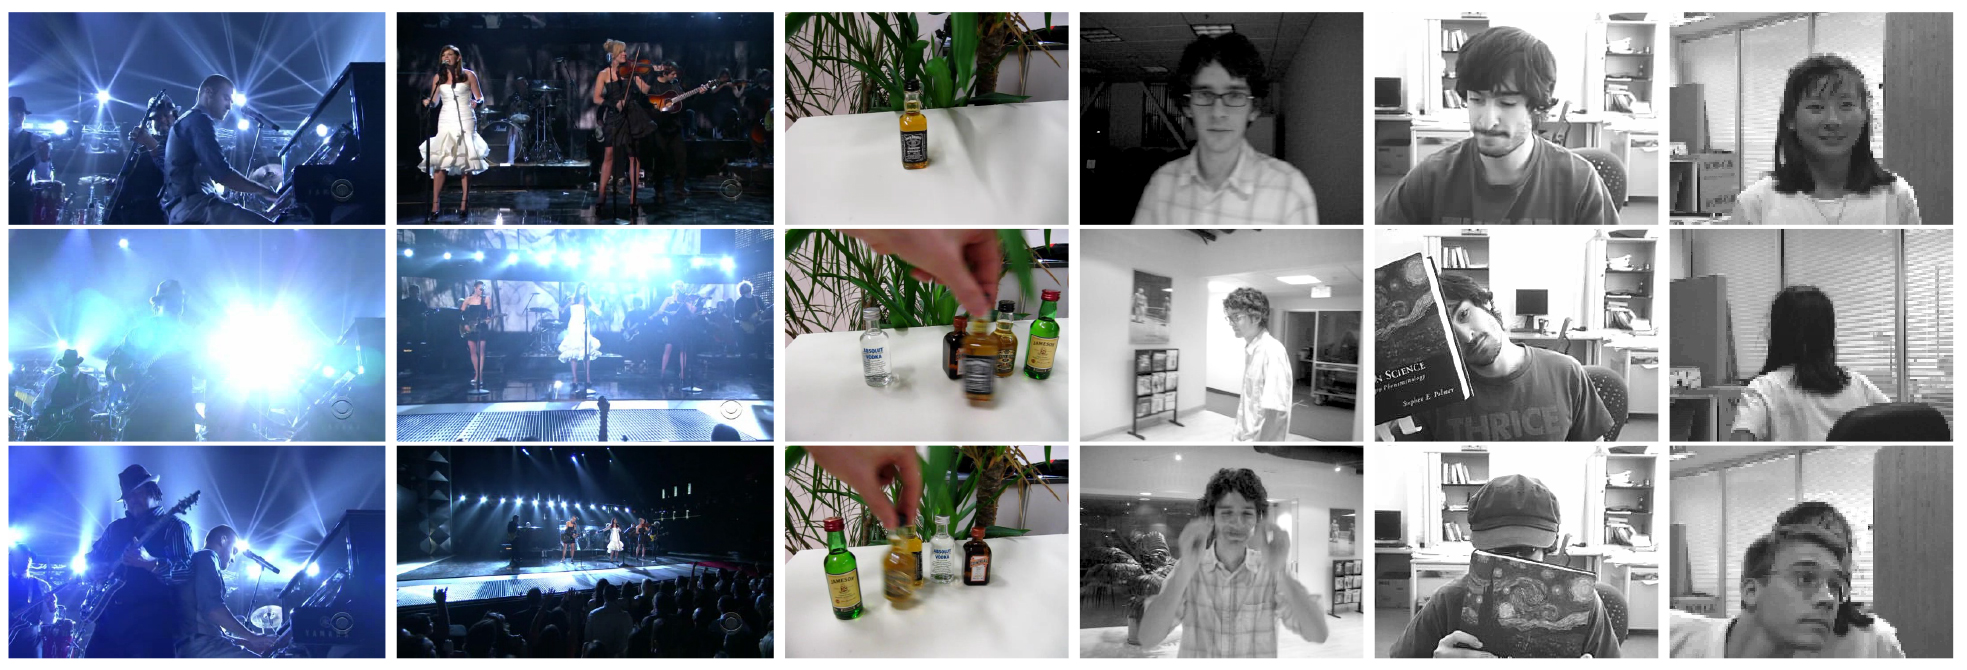 Frames of the tracking sequences used for evaluation. From left to right: Shaking, Singer1, Liquor, David, Faceocc2, Girl.